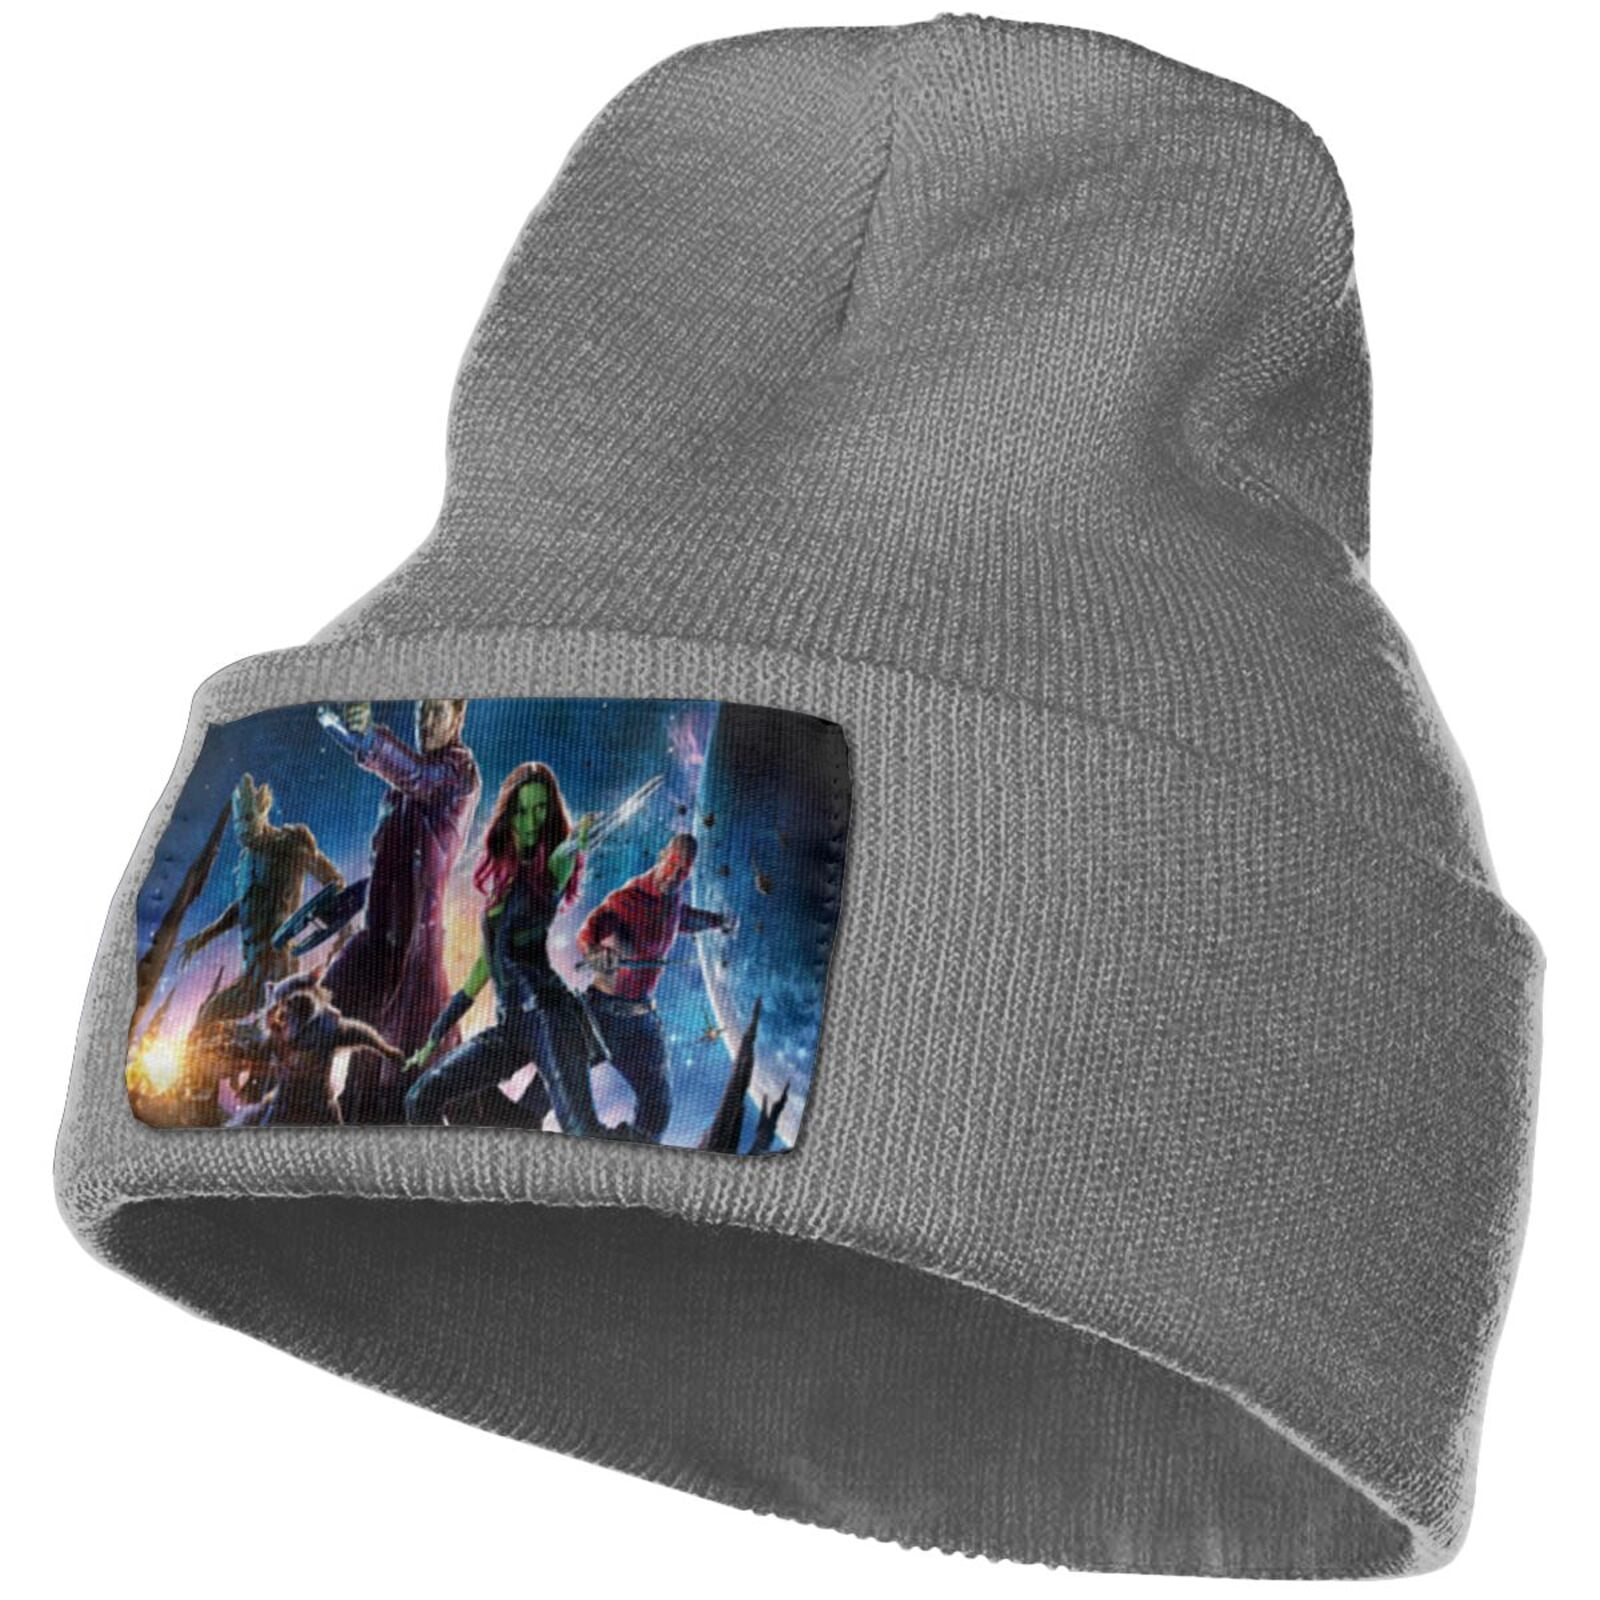 SUPERHERO GUARDIANS OF THE GALAXY KNITTED HAT 